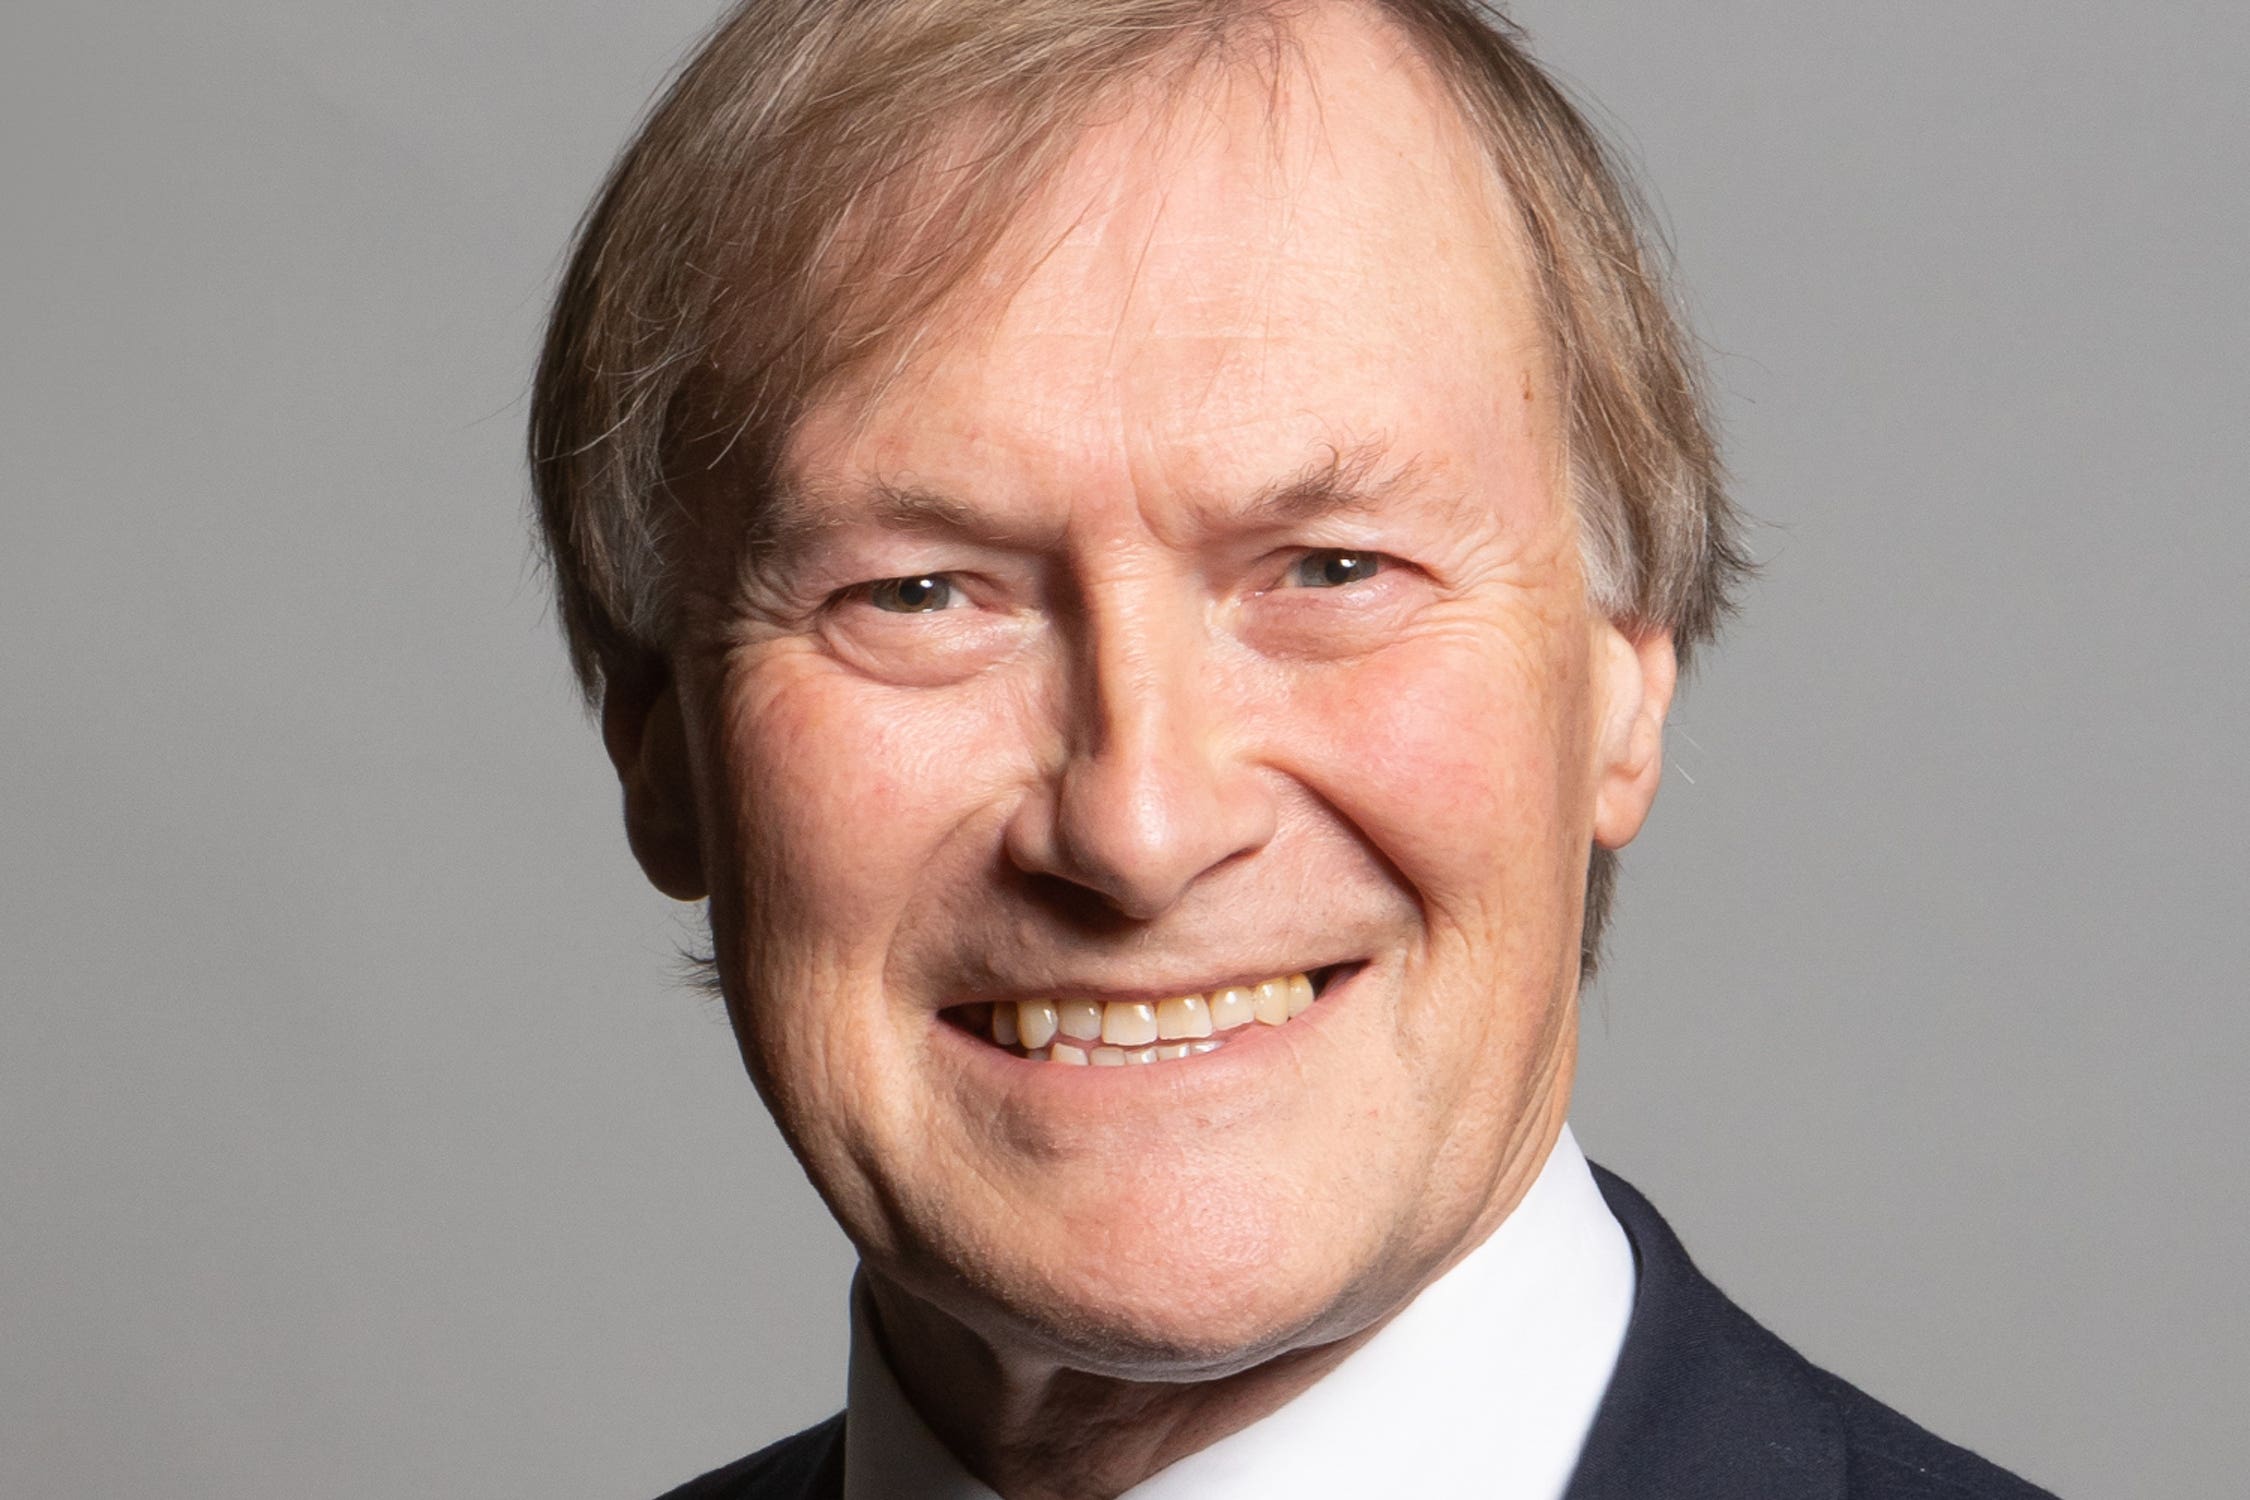 Sir David Amess was murdered in October 2021